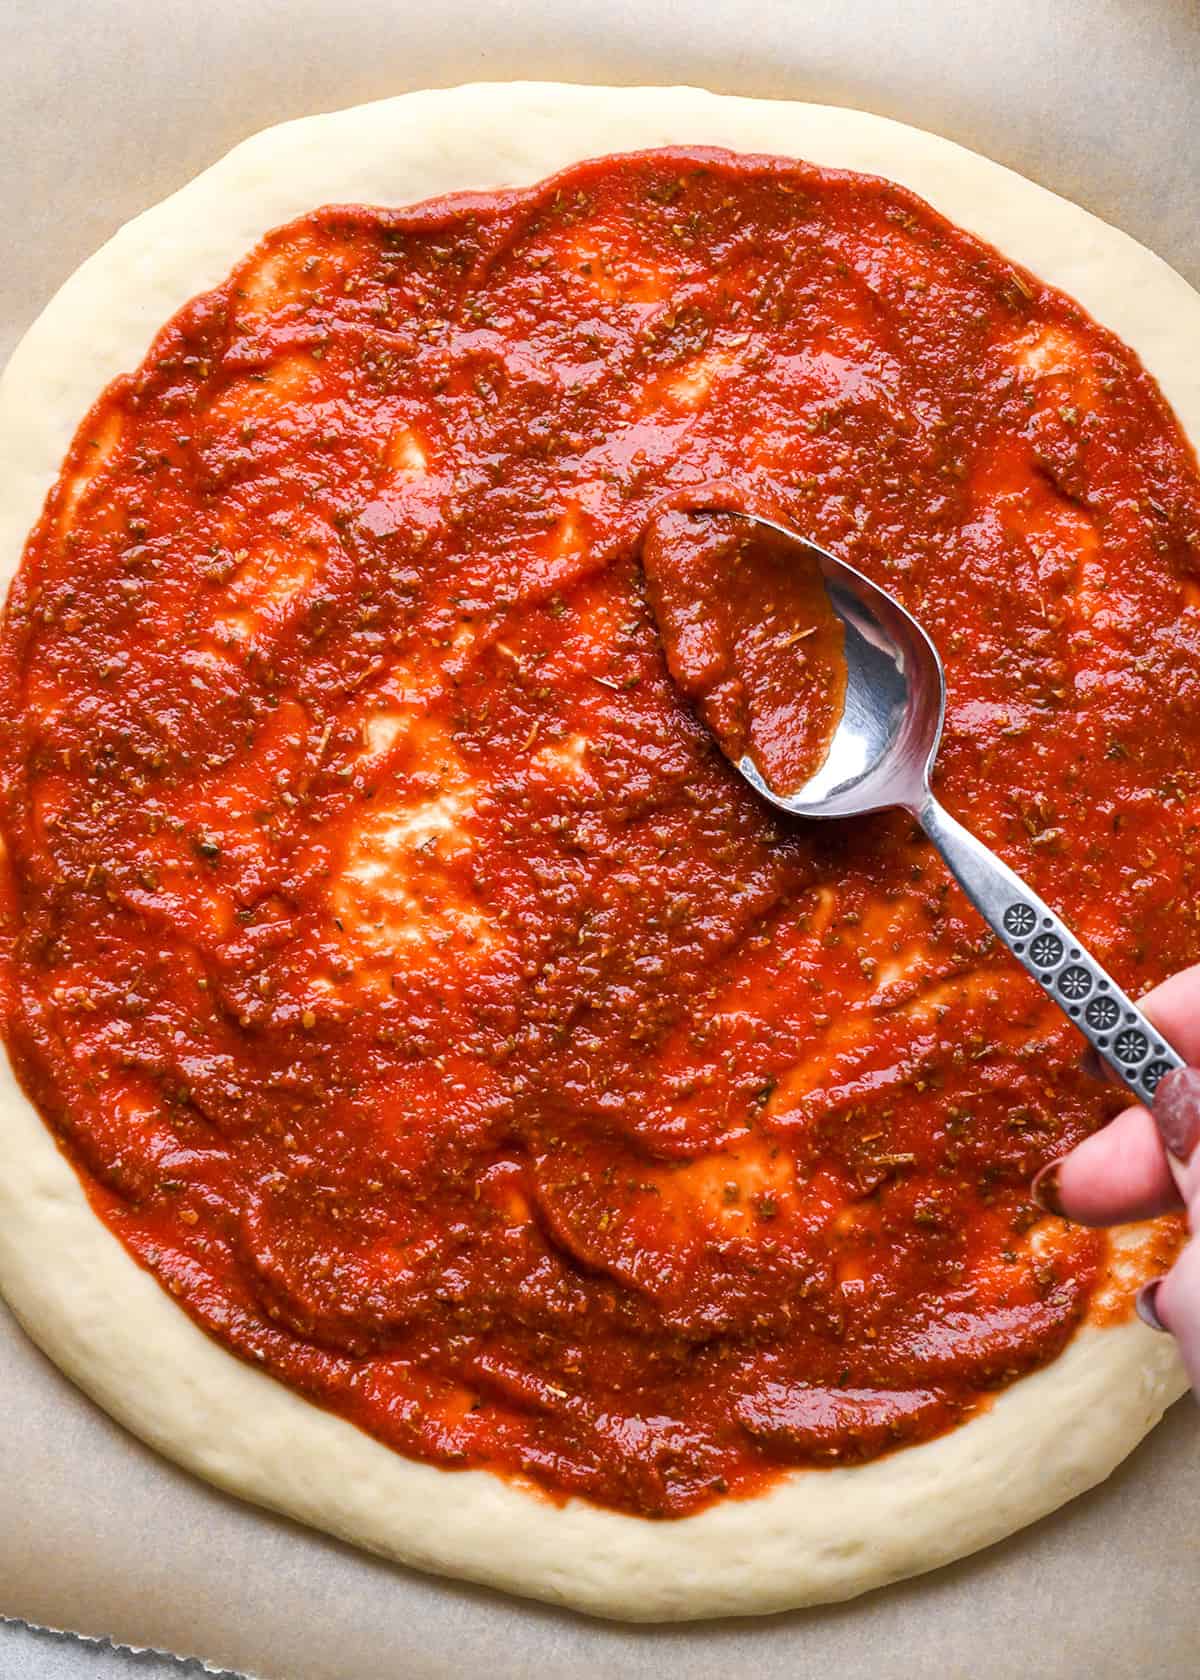 pizza sauce being spread on homemade pizza dough